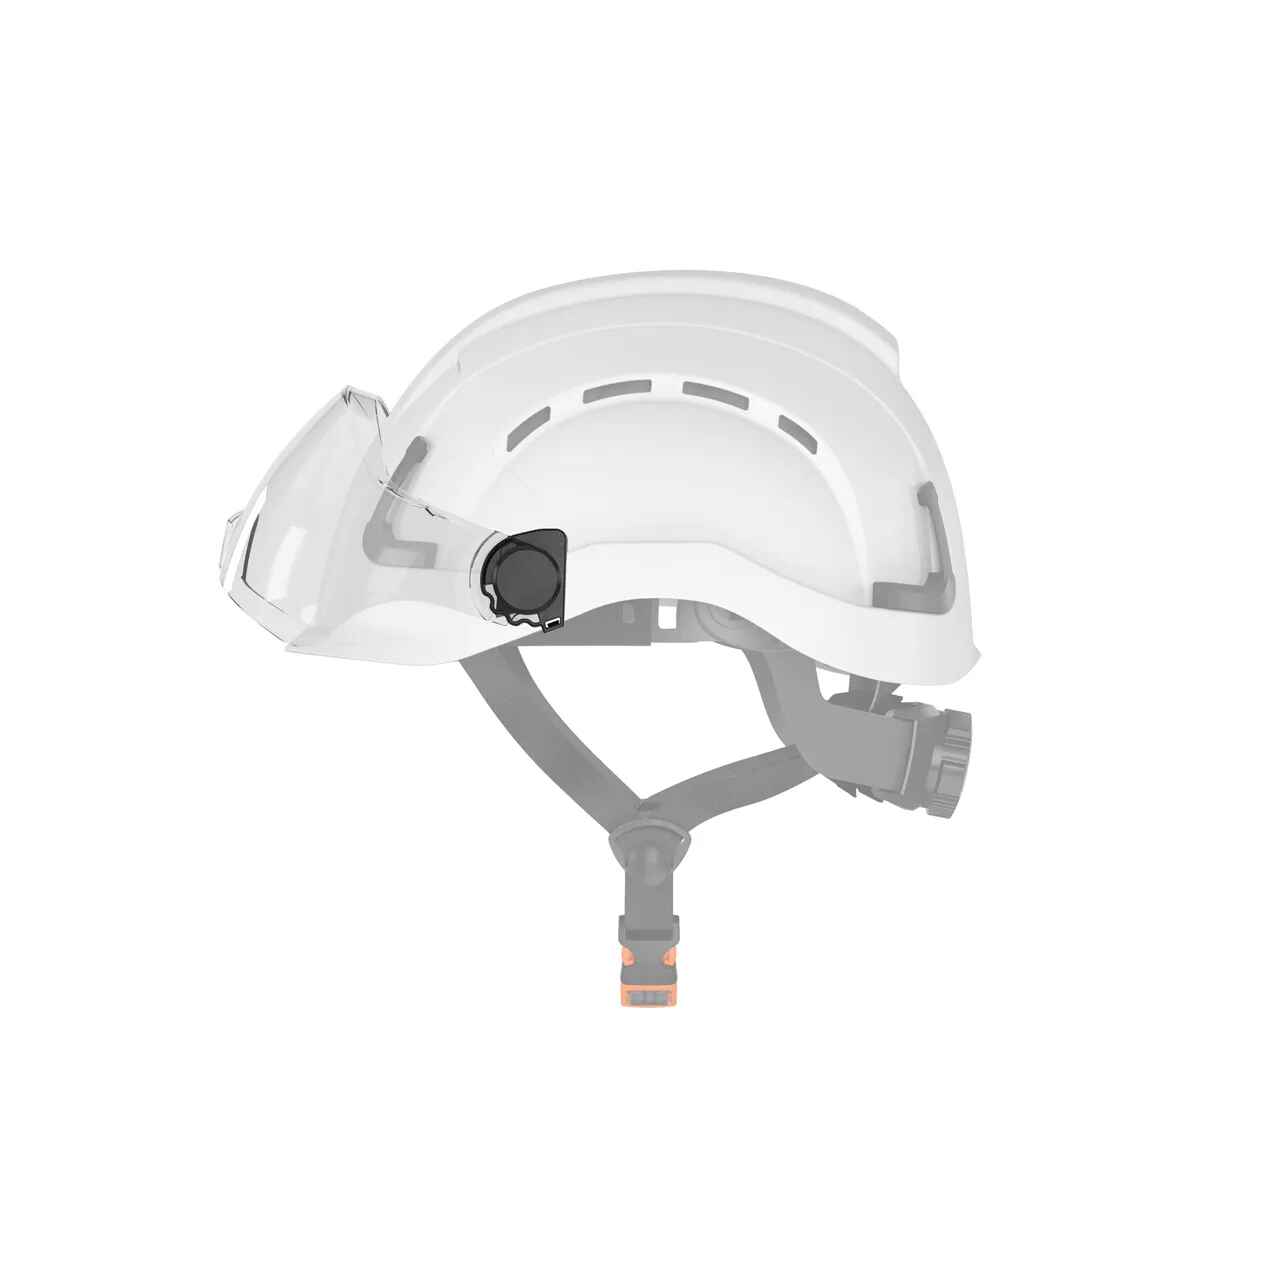 H2 Visor (CLEAR), ANSI Z87+ Rated, Anti-fog and Anti-Scratch - Defender Safety